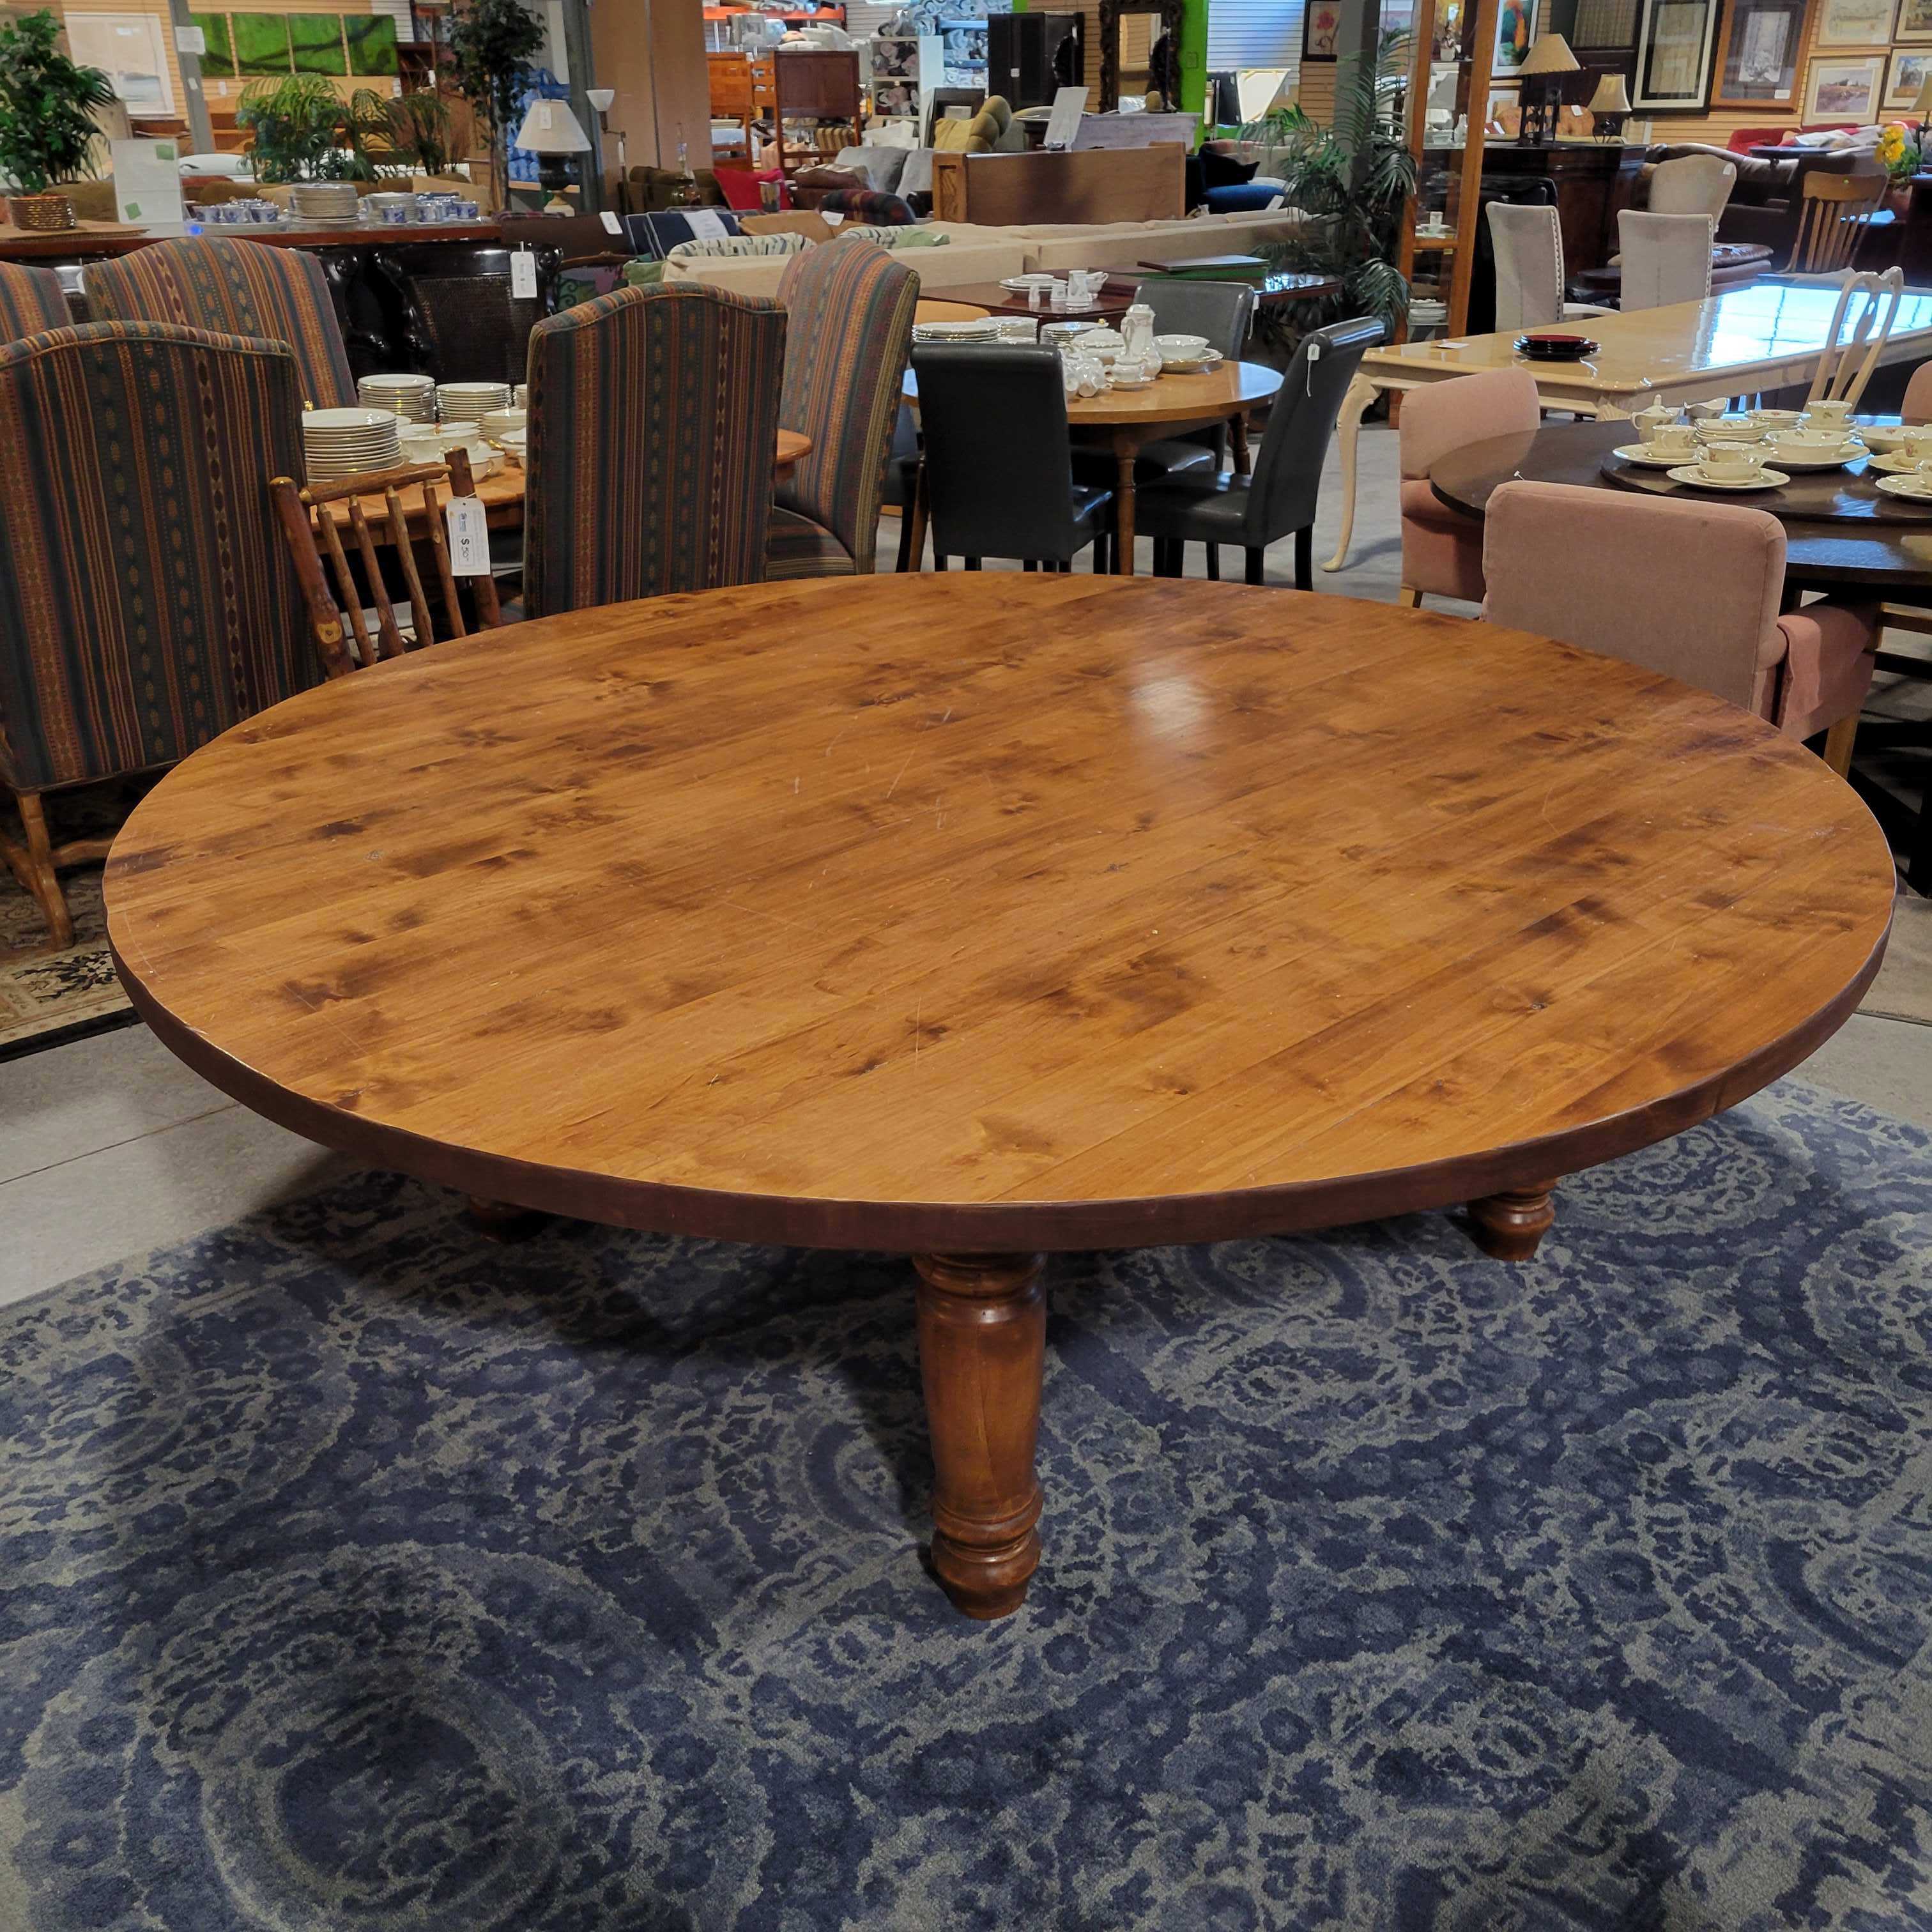 90" Diameter x 30" Round Wood Carved Legs Dining Table